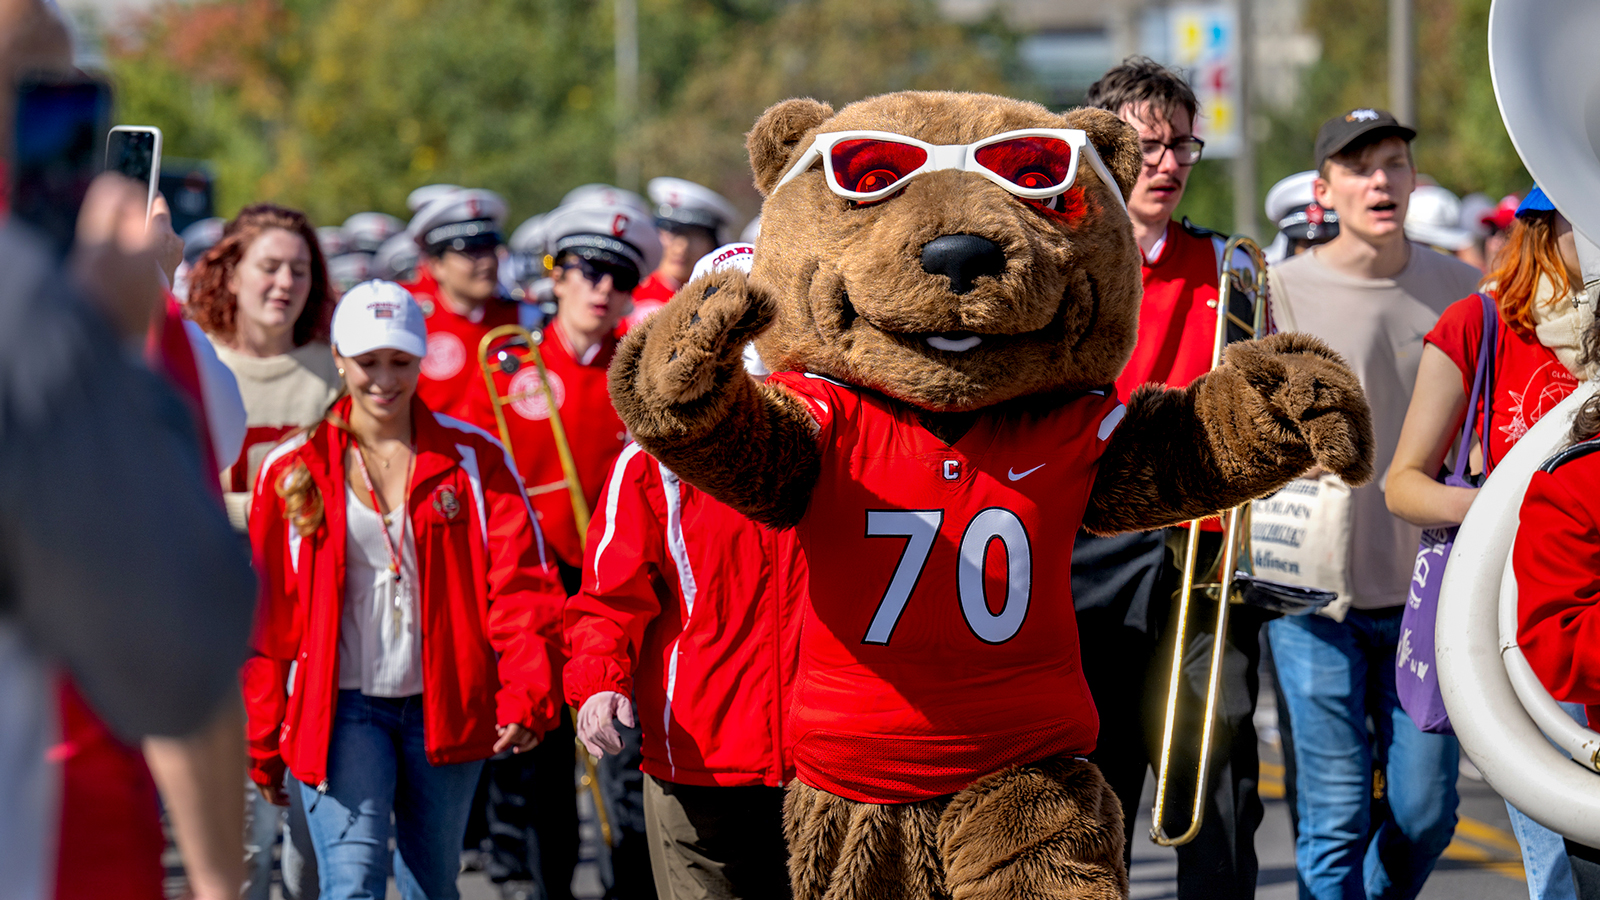 Accompanying the Marching Band, Touchdown brings his Big Red best